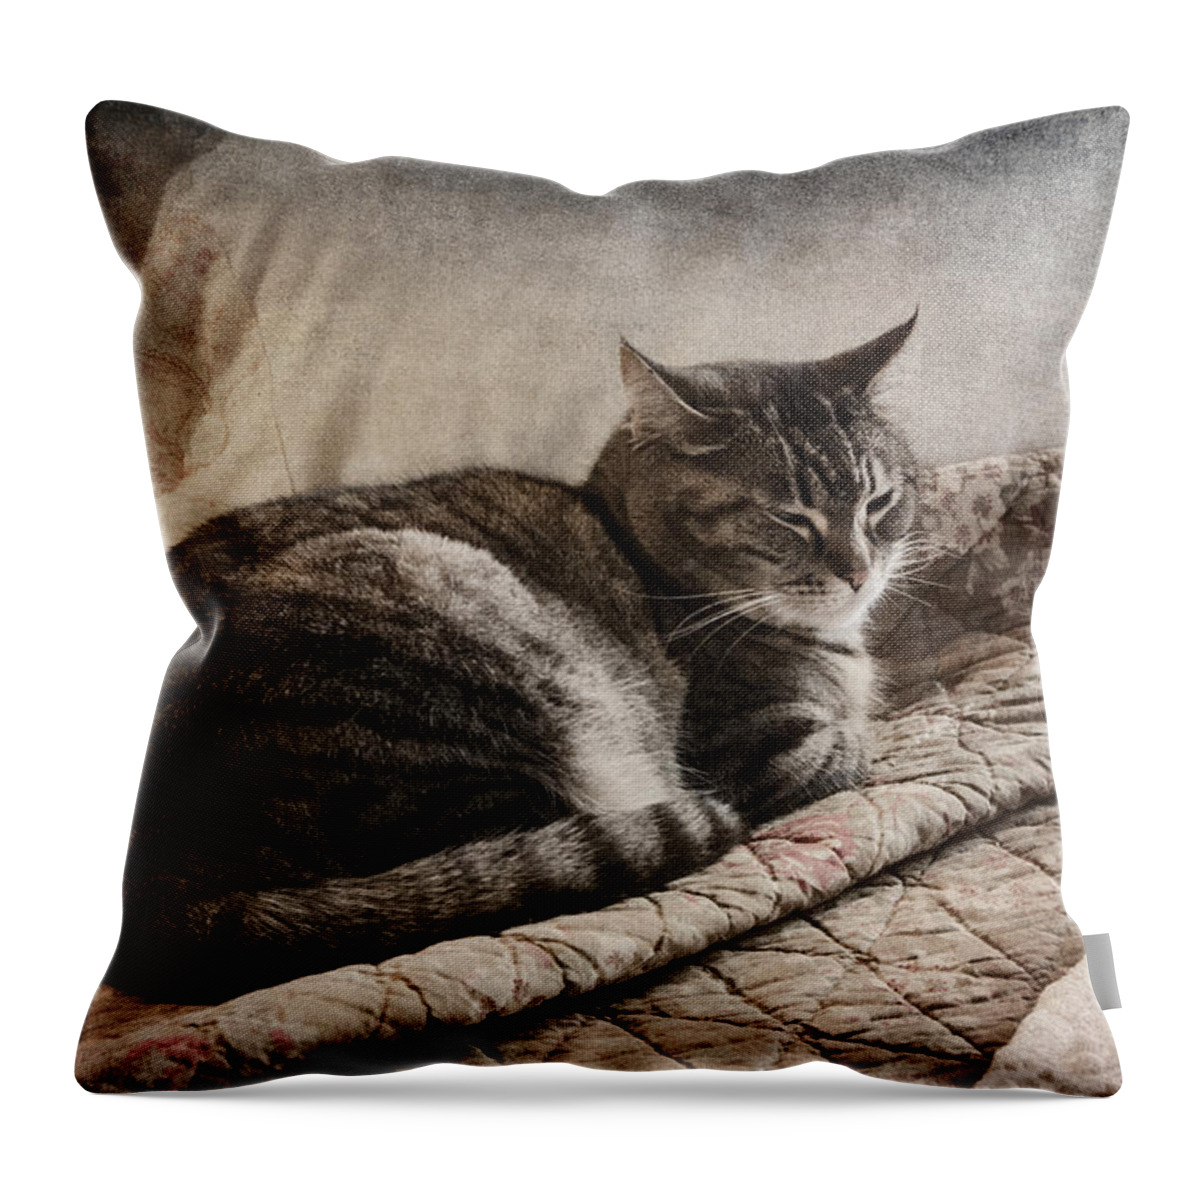 Cat Throw Pillow featuring the photograph Cat on the Bed by Carol Leigh